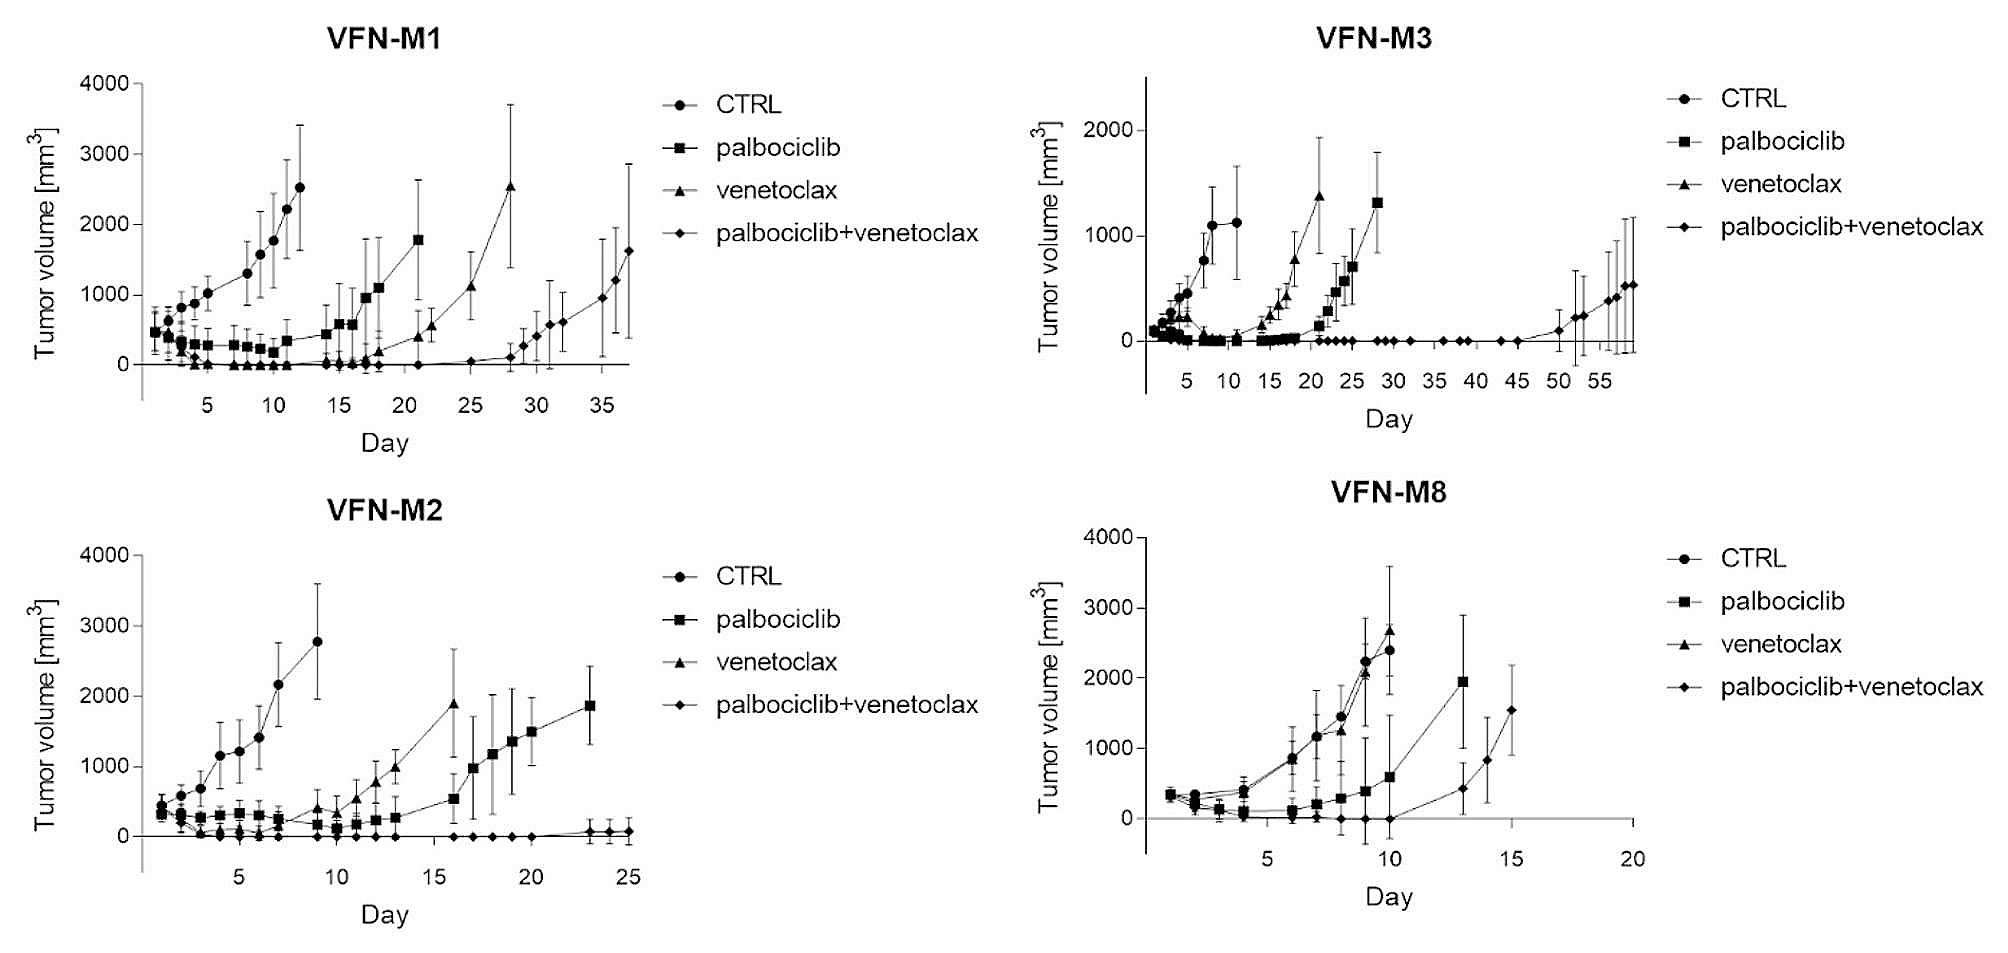 Cyclin dependent kinase 4/6 inhibitor palbociclib synergizes with BCL2 inhibitor venetoclax in experimental models of mantle cell lymphoma without RB1 deletion